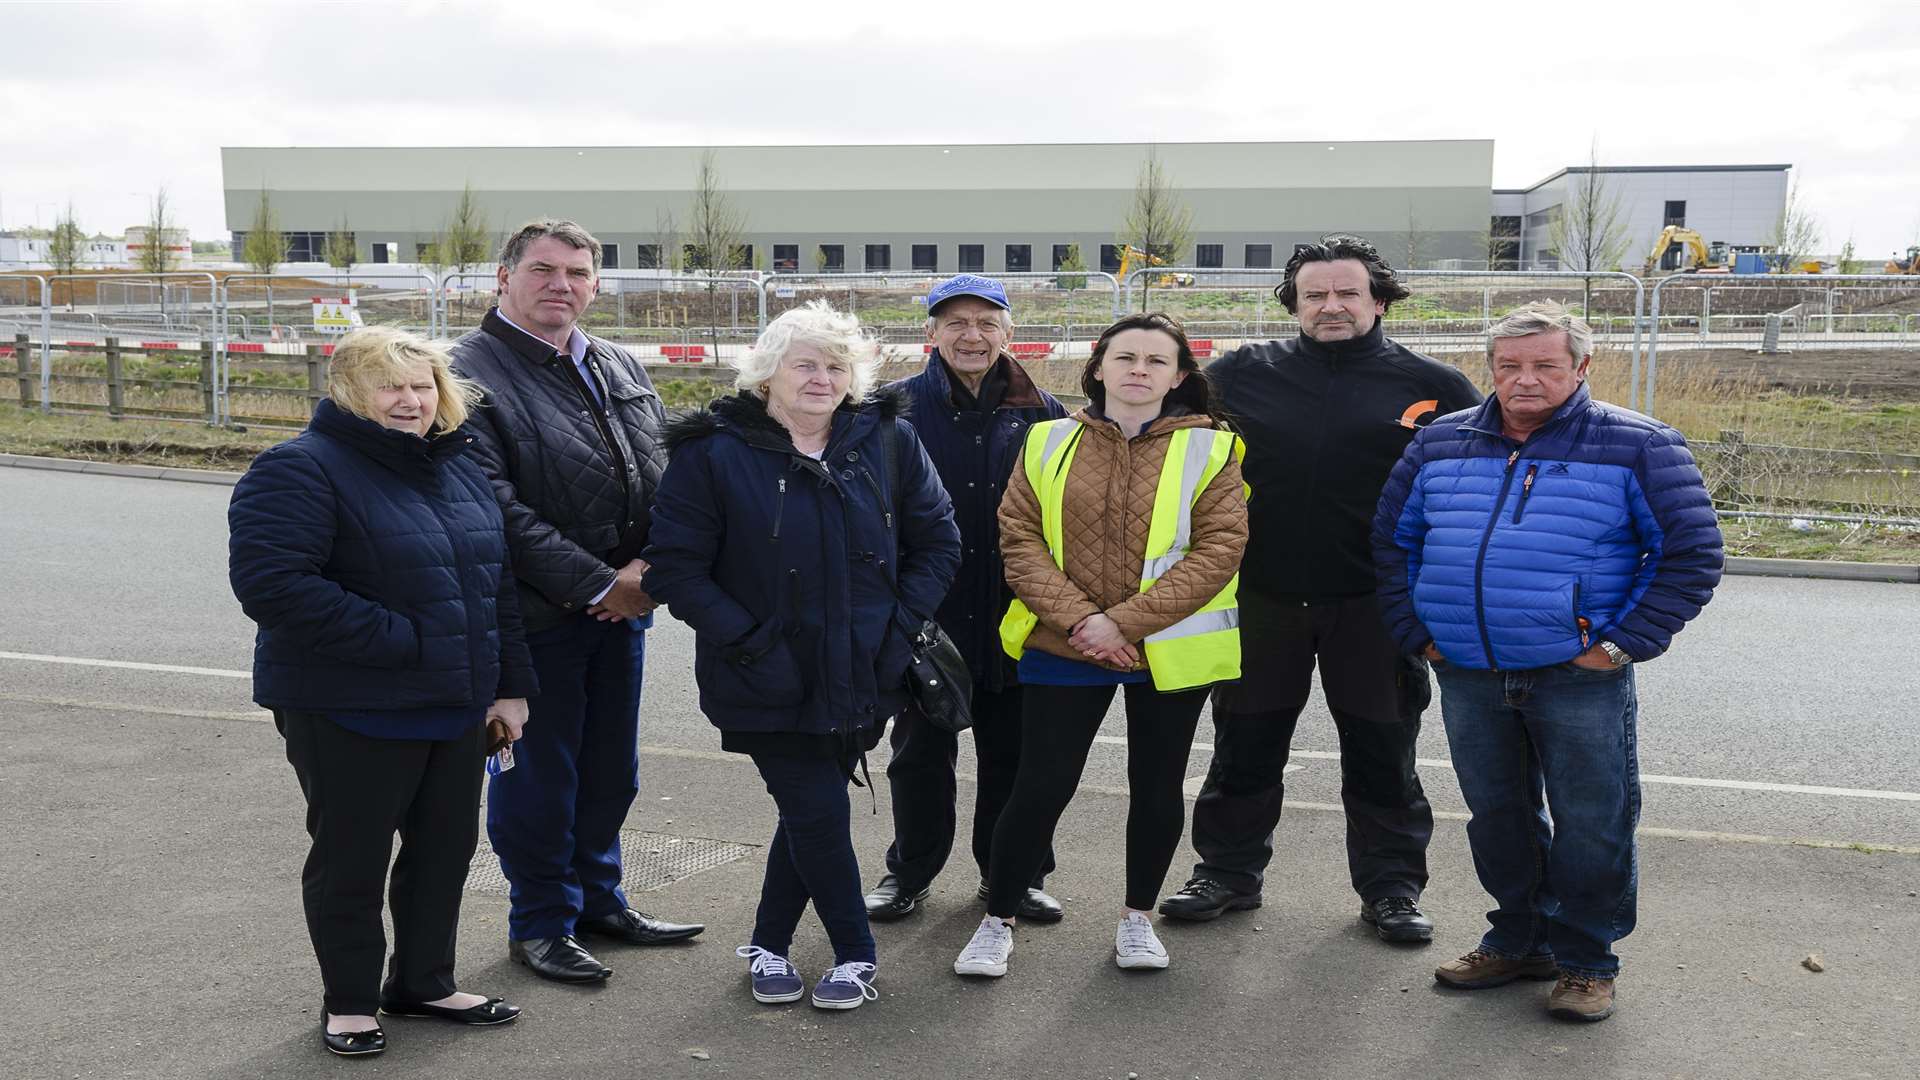 Queenborough Town Council members, from the left, Sue Simpson, Mike Whiting (representing Gordon Henderson), Jackie Constable, Ted Pye, Zoe Swarbrick, haulier Paul Wigglesworth and Swale councillor Richard Darby outside the new Aldi distribution centre at Neats Court, Queenborough.